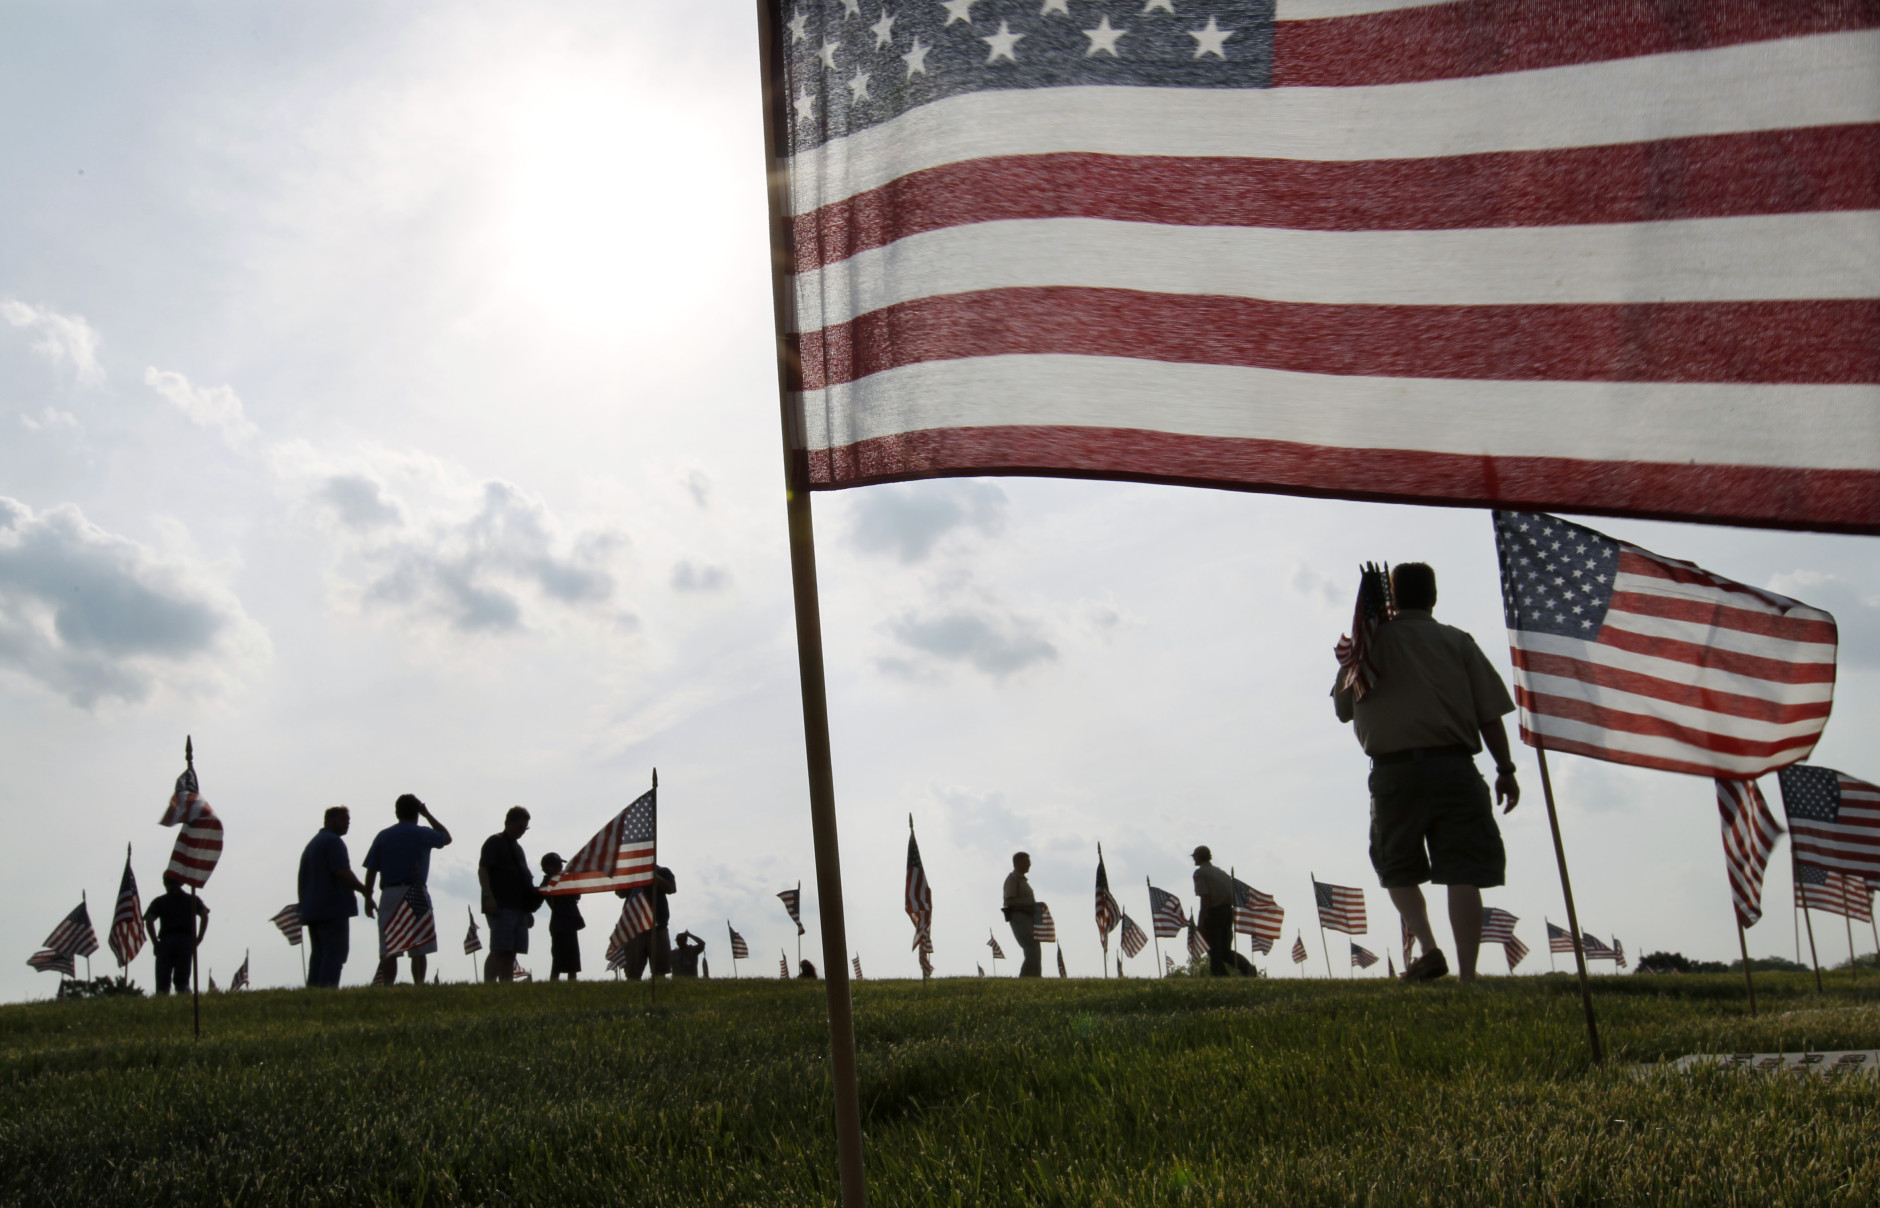 Throngs of scouts place thousands of flags on veteran's graves at Brig. Gen. William C. Doyle Veterans Memorial Cemetery in honor of Memorial Day, Friday, May 27, 2016, in Wrightstown N.J. (AP Photo/Mel Evans)